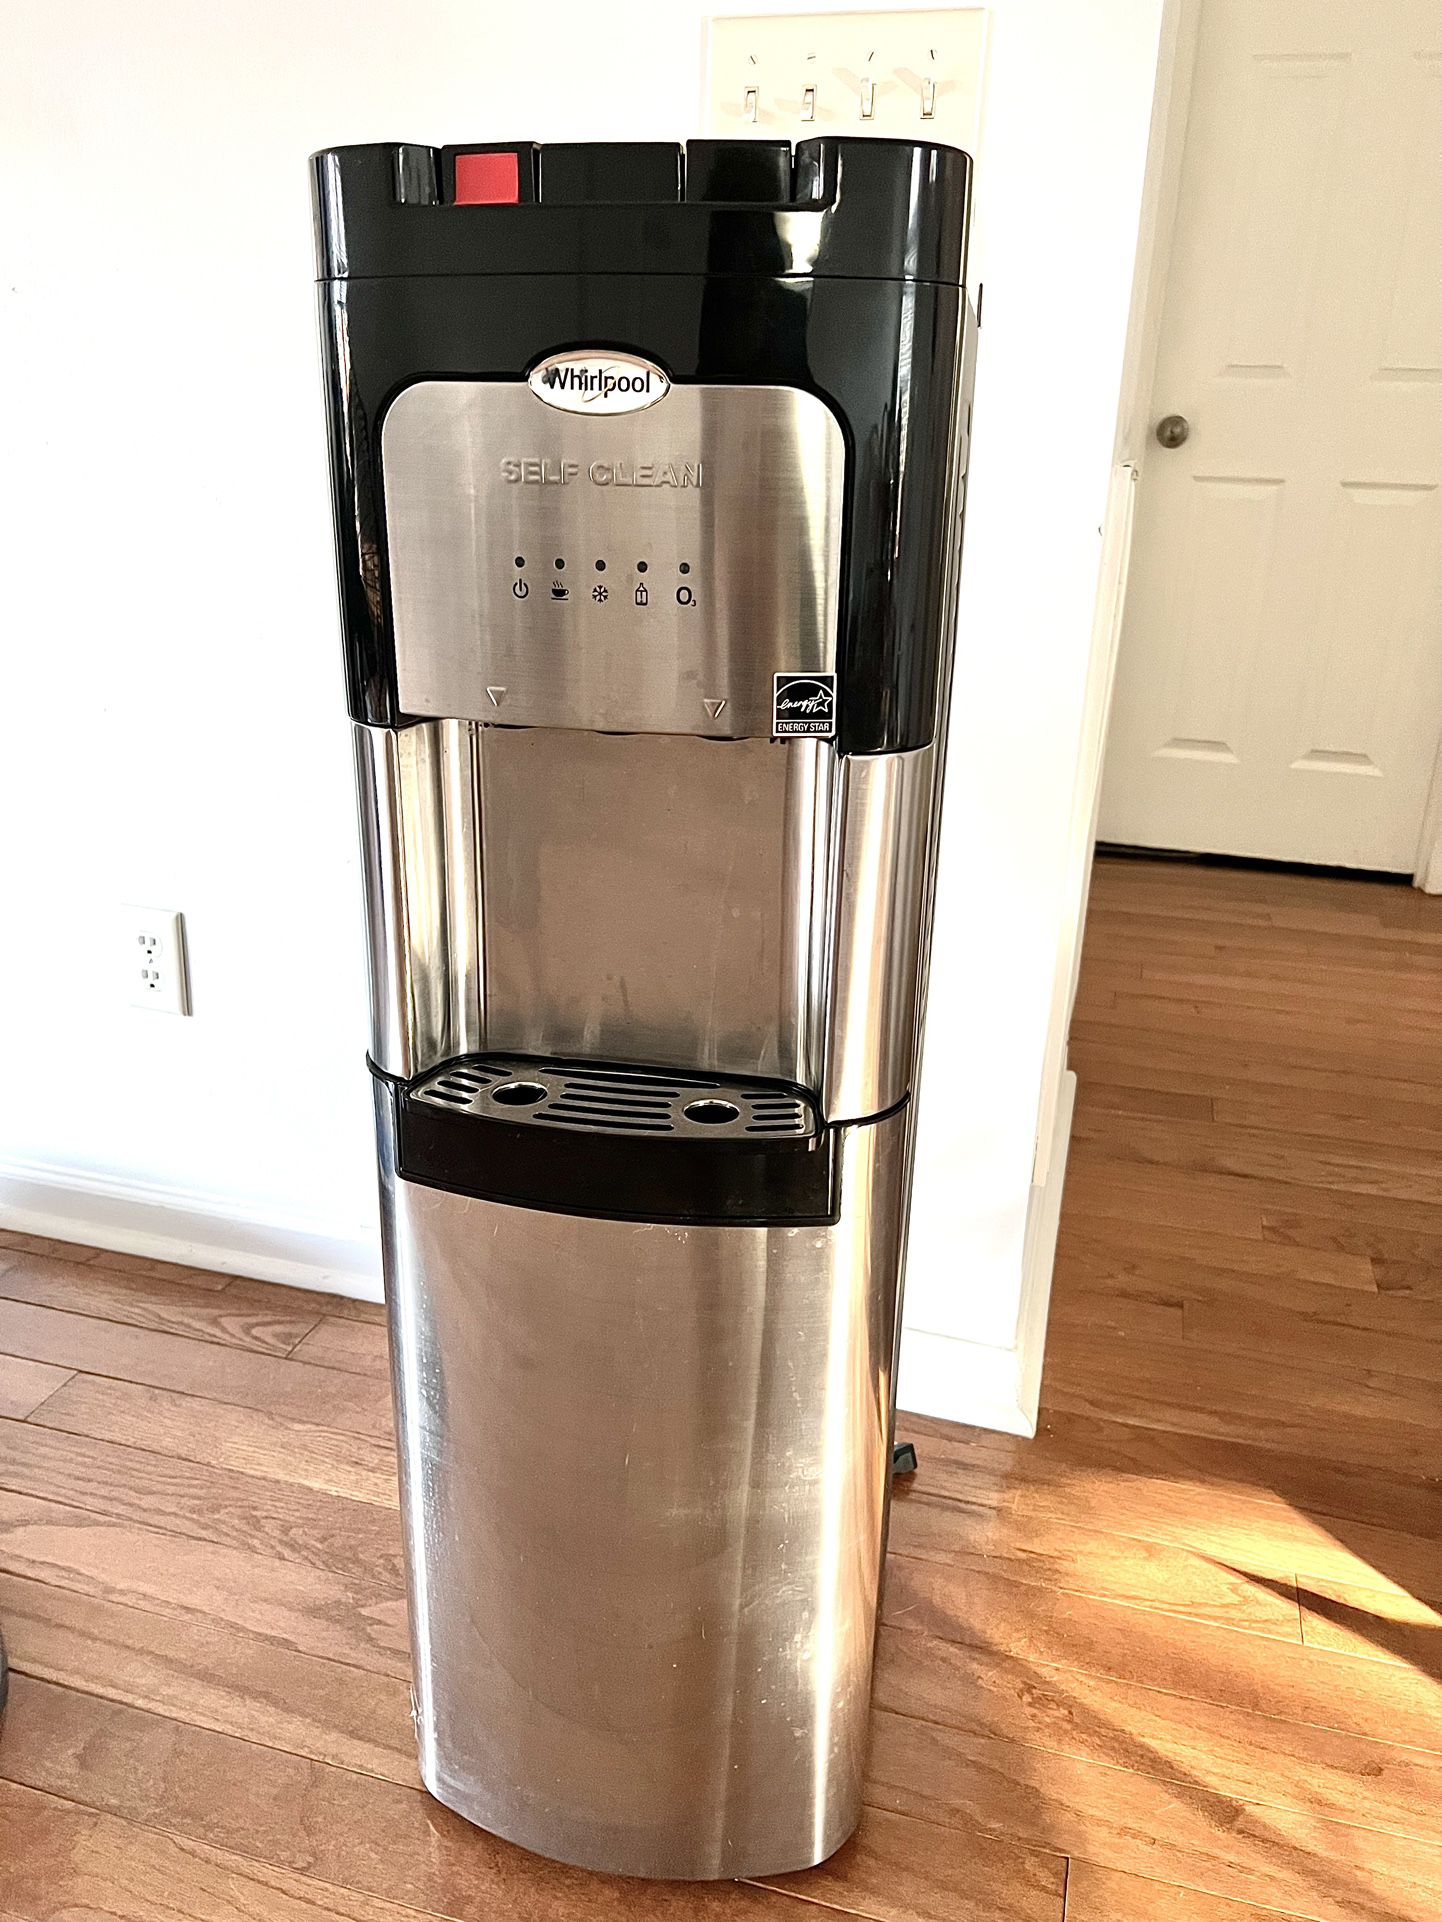 Whirlpool Stainless Steel Hot And Cold Water Dispenser